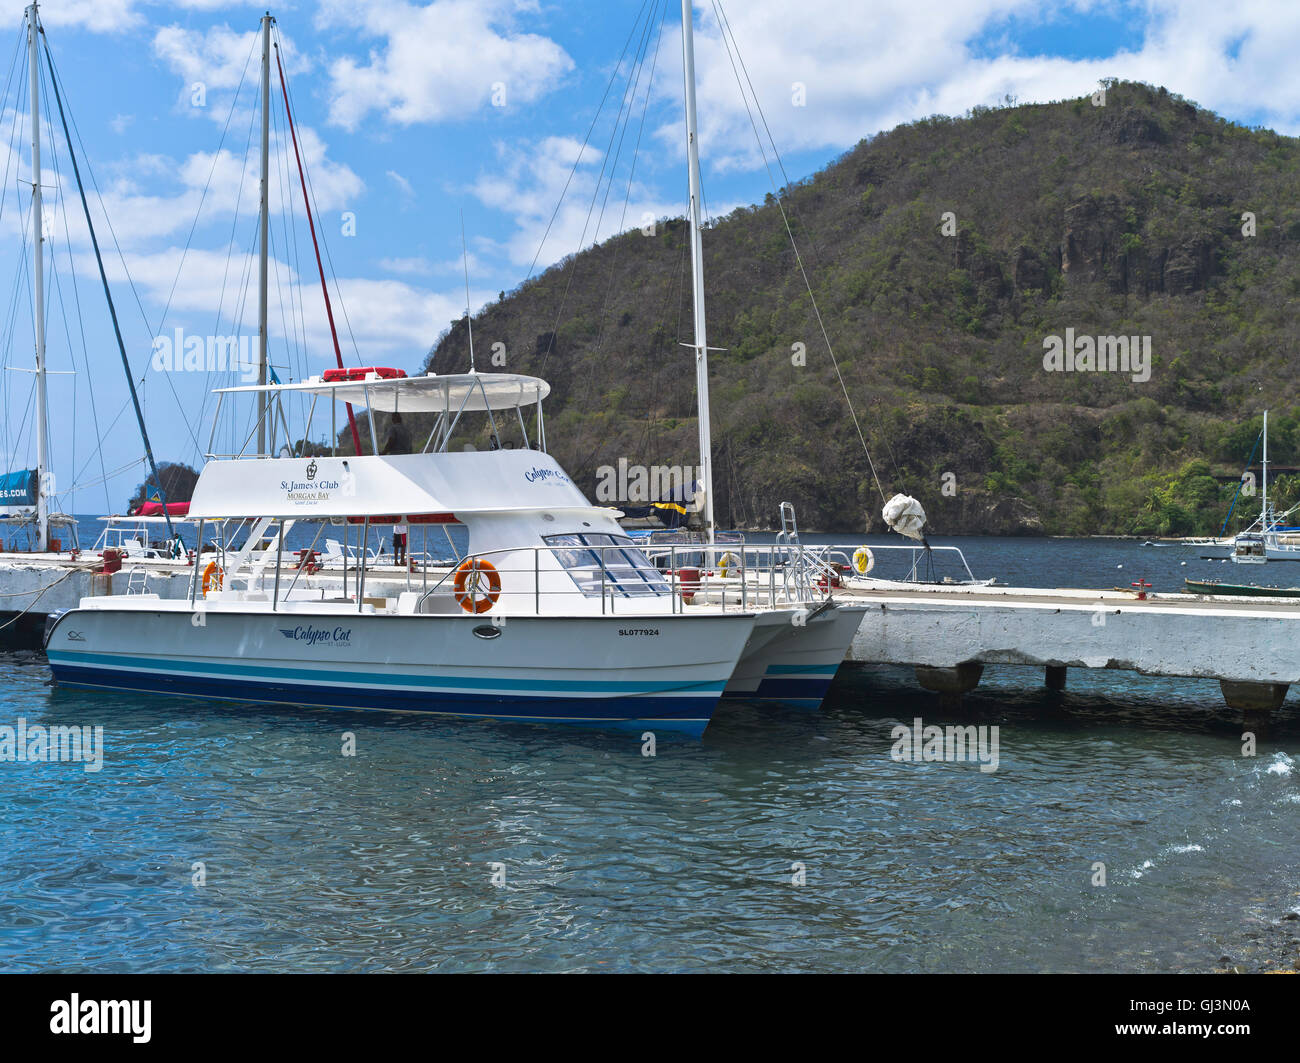 dh Soufriere ST LUCIA CARIBBEAN Calypso Cat Tourist catarman berthed at pier ?St James Club Morgan bay Stock Photo